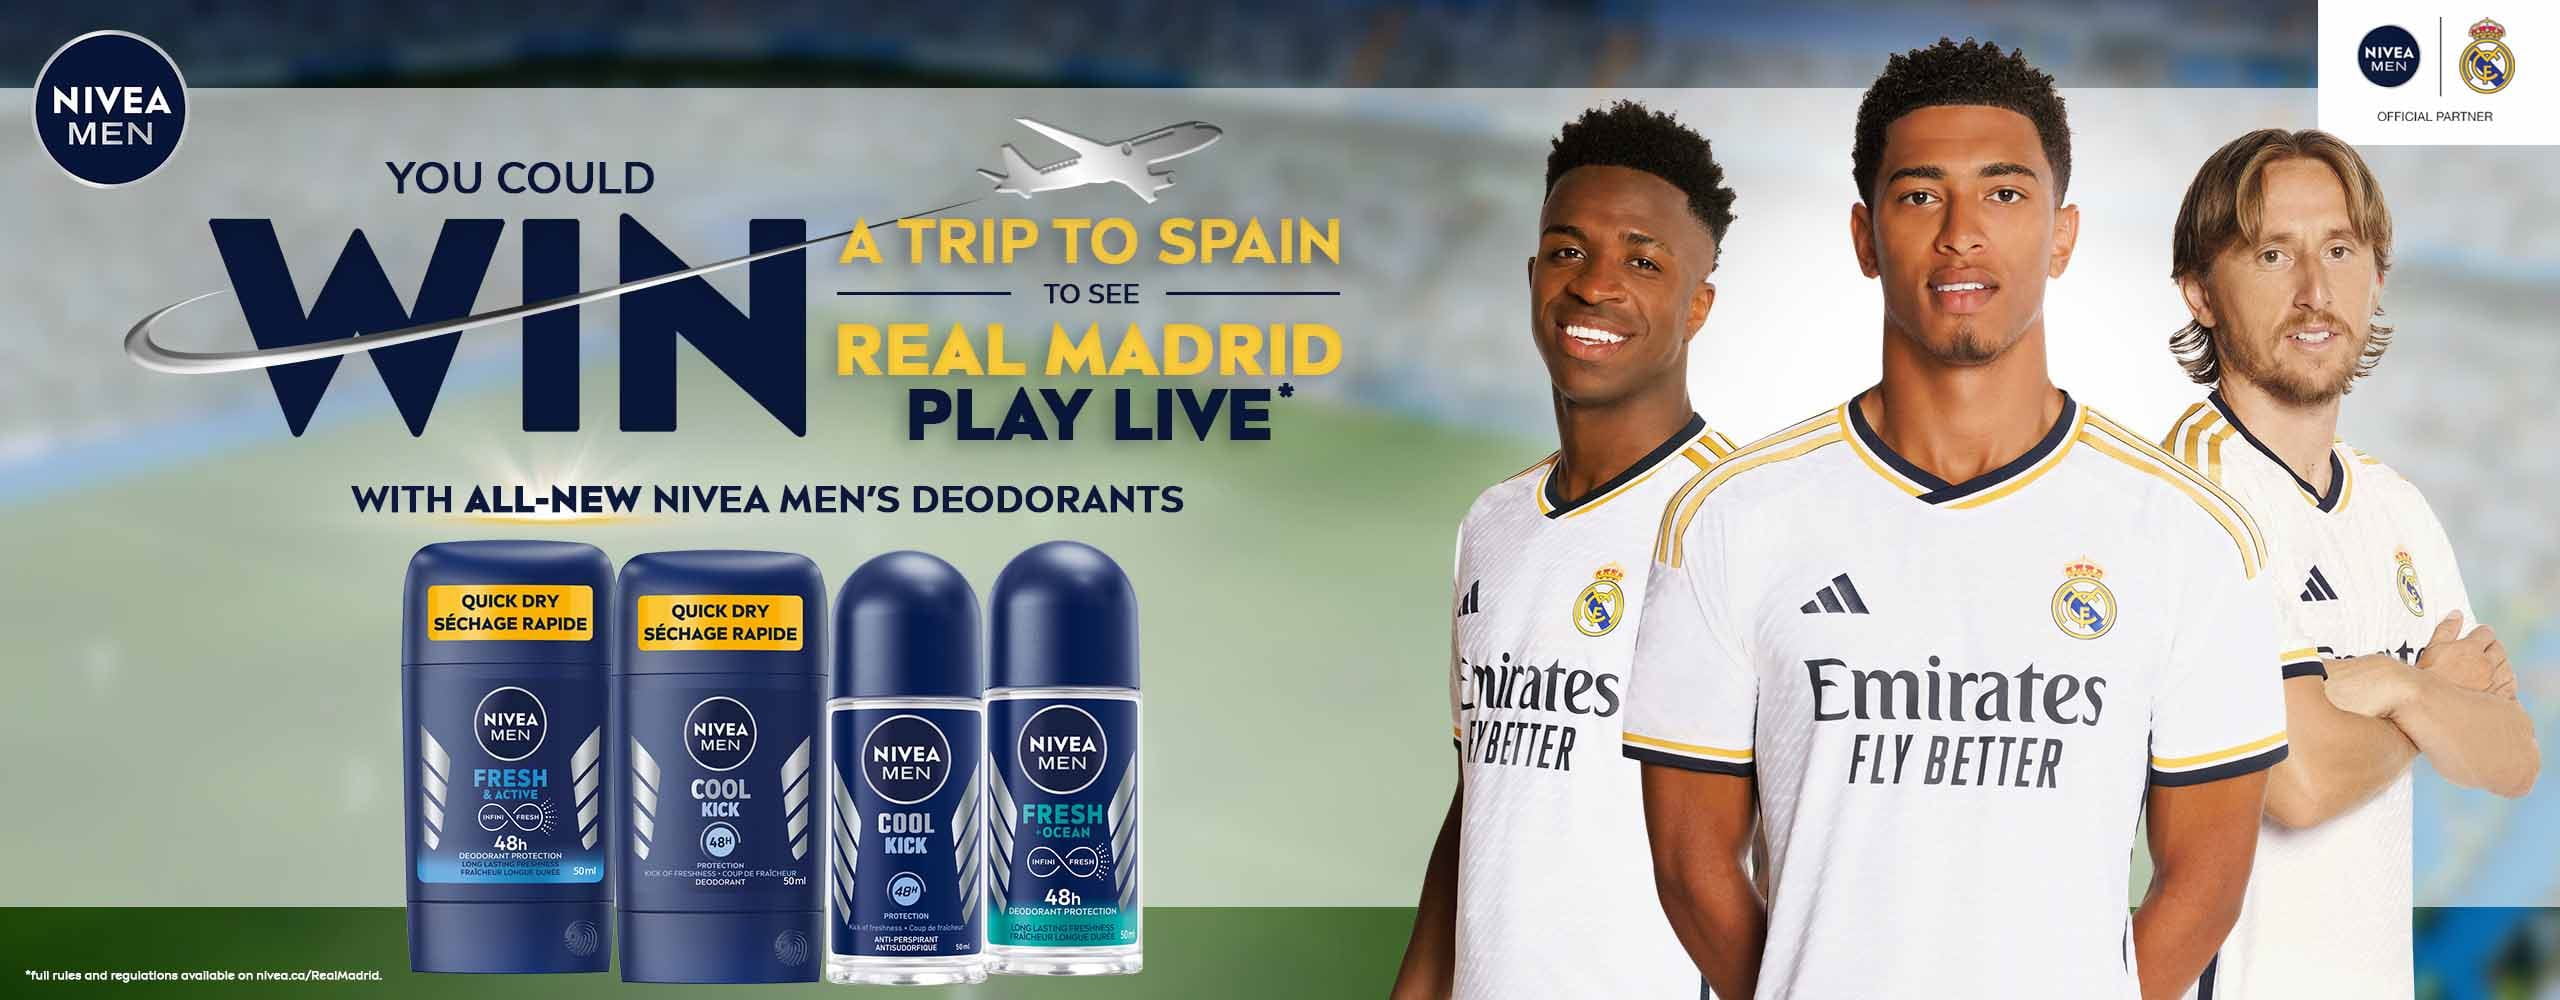 A view of three Real Madrid soccer players standing close to each other with four NIVEA MEN'S deodorant products shown to the left.